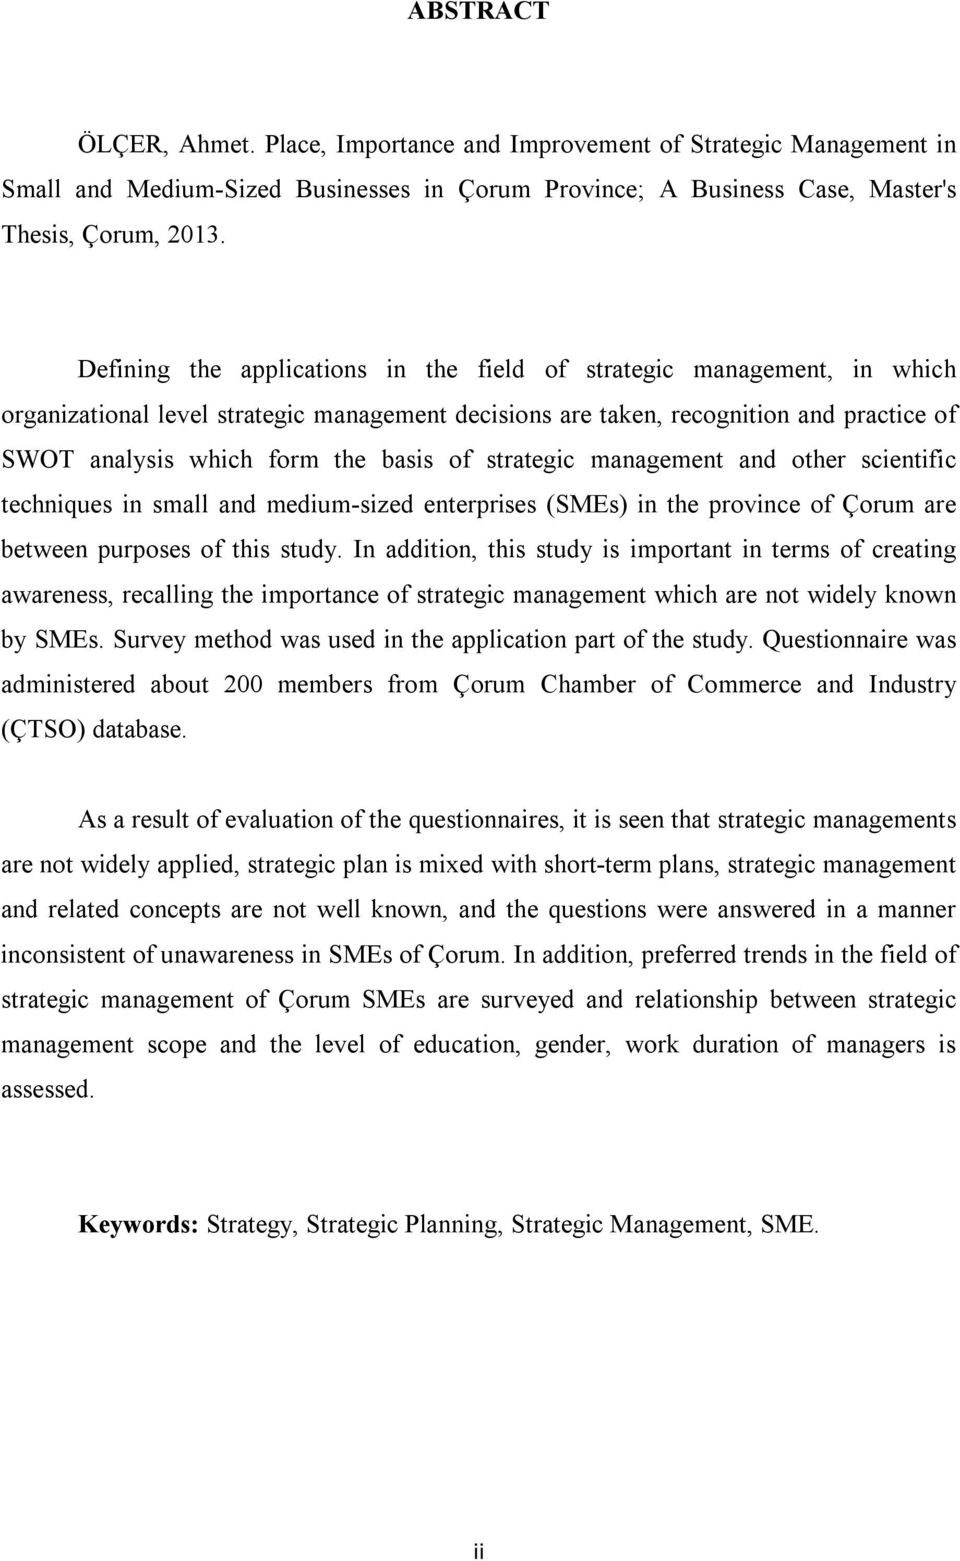 of strategic management and other scientific techniques in small and medium-sized enterprises (SMEs) in the province of Çorum are between purposes of this study.